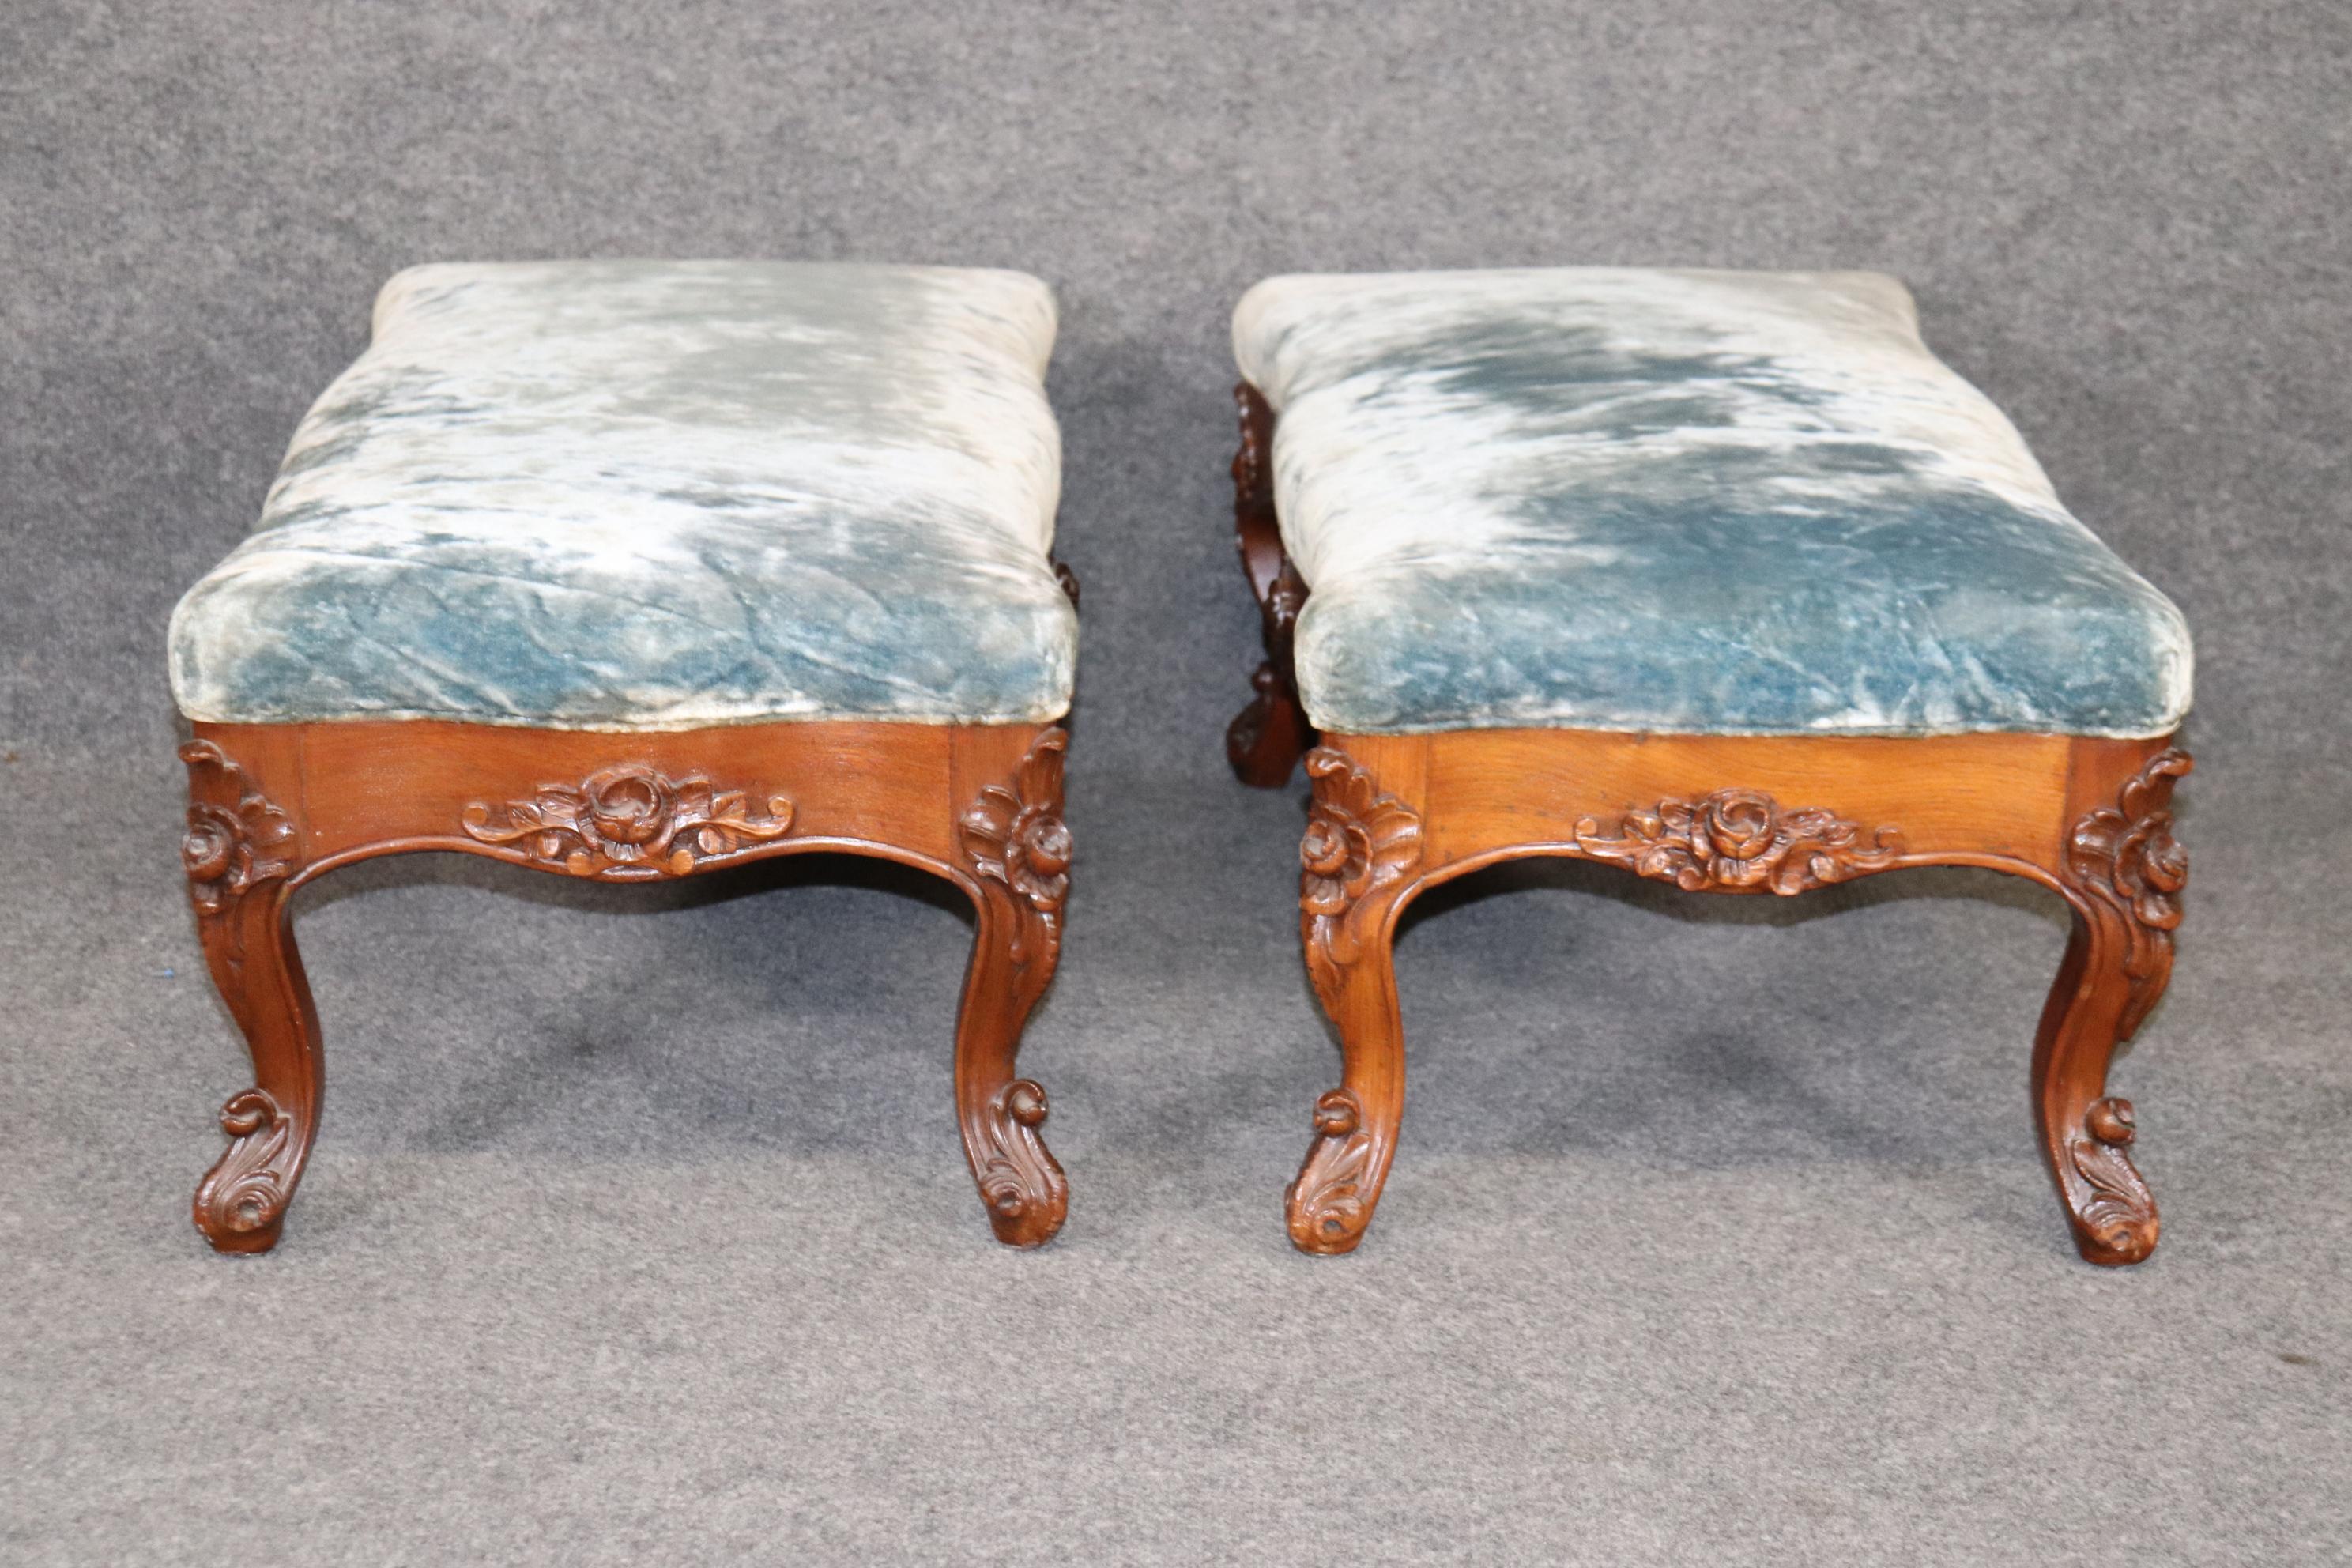 Late 19th Century Pair of Rare Walnut American Victorian Foot Stools Attributed to Belter  For Sale